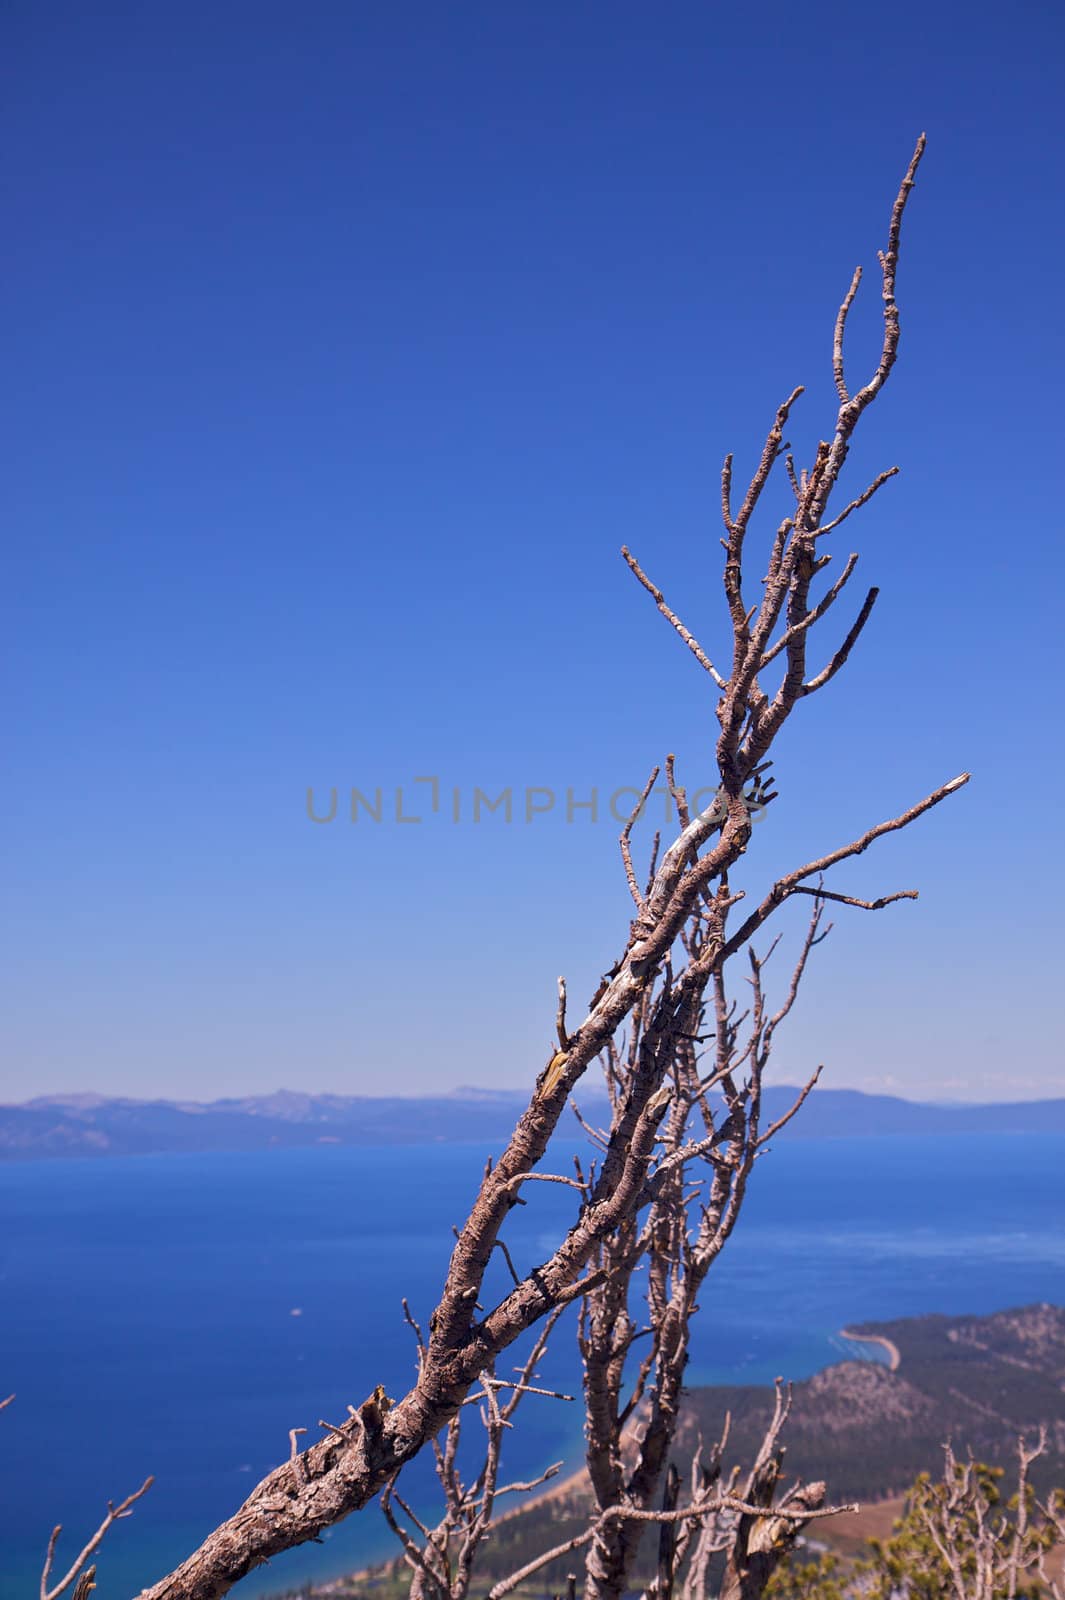 Isolated Dead tree with a back drop of a blue sky and lake tahoe